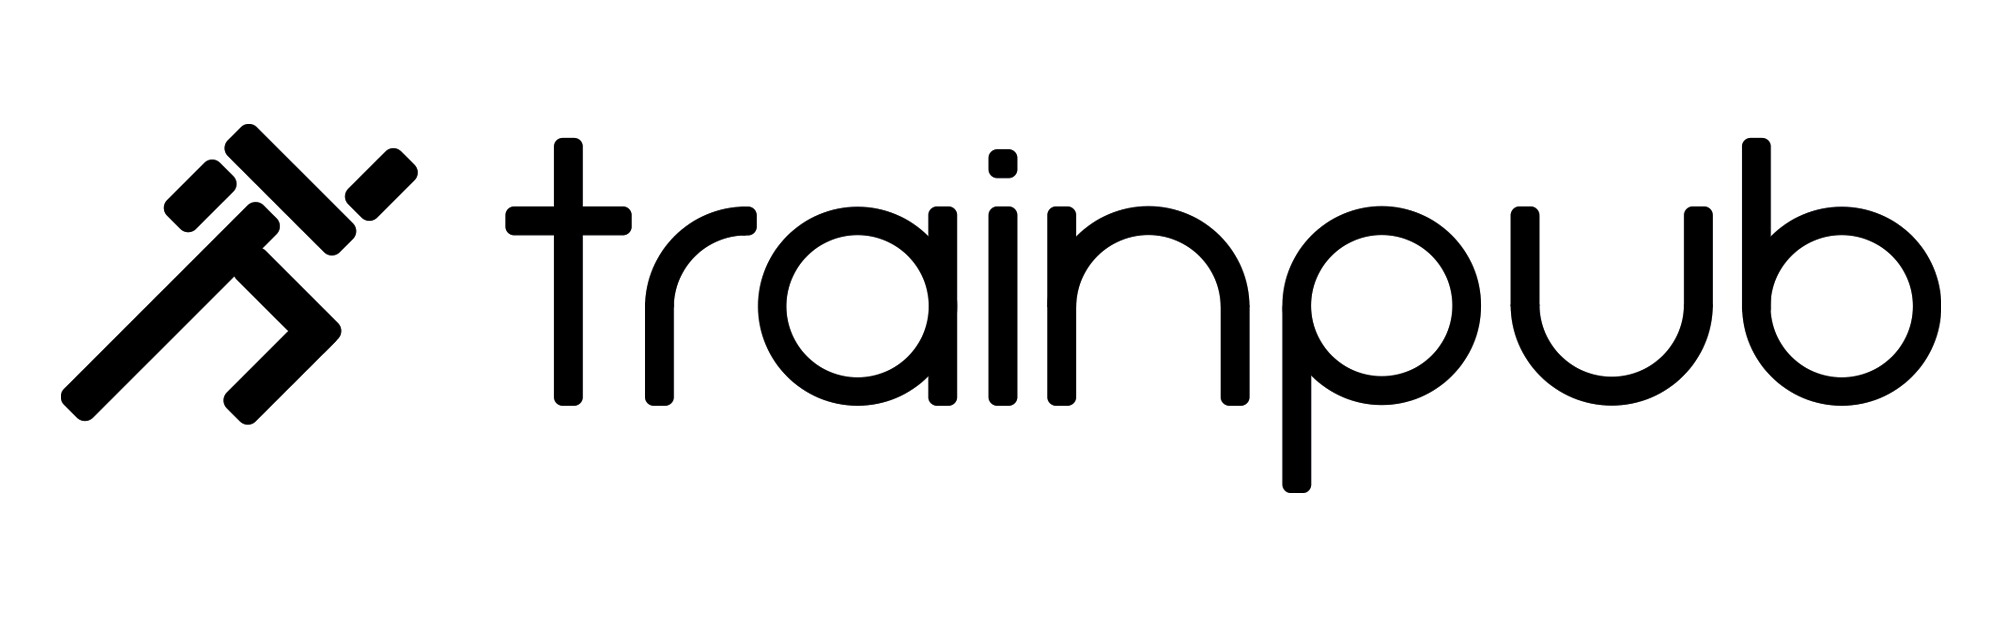 An idea with a runner as logo. This runner should contain the "T" and the "P" of Trainpub.